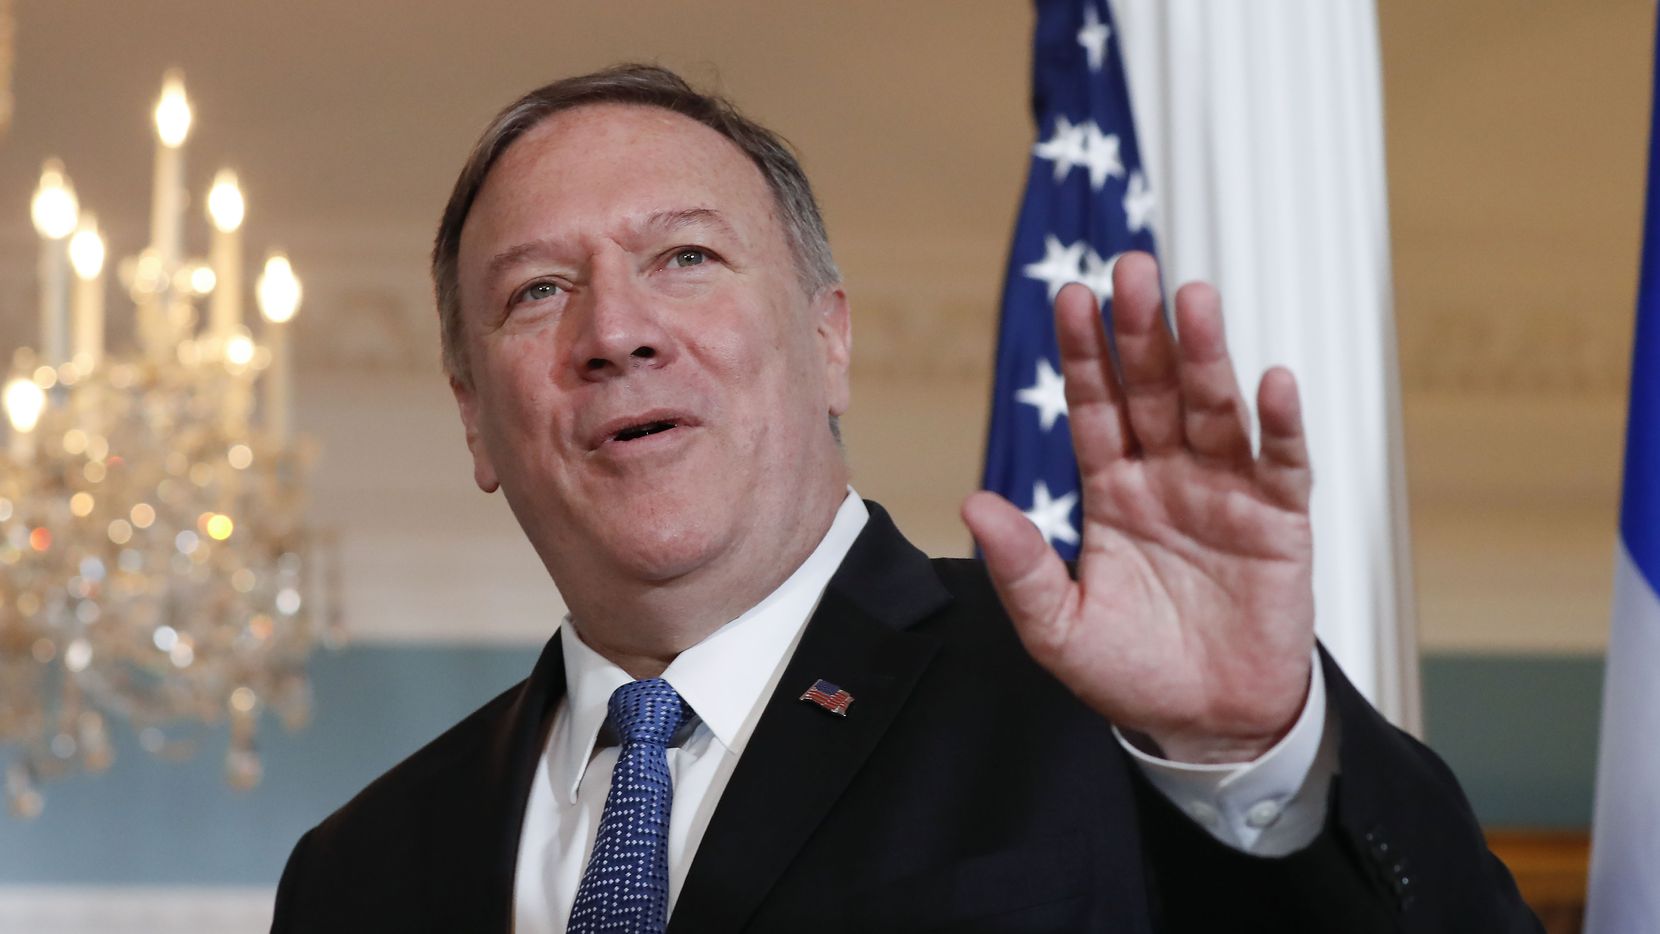 Secretary of State Mike Pompeo waves to members of the media in a 2019 file photo.  He will speak at a Christian media conference in Grapevine on June 24.